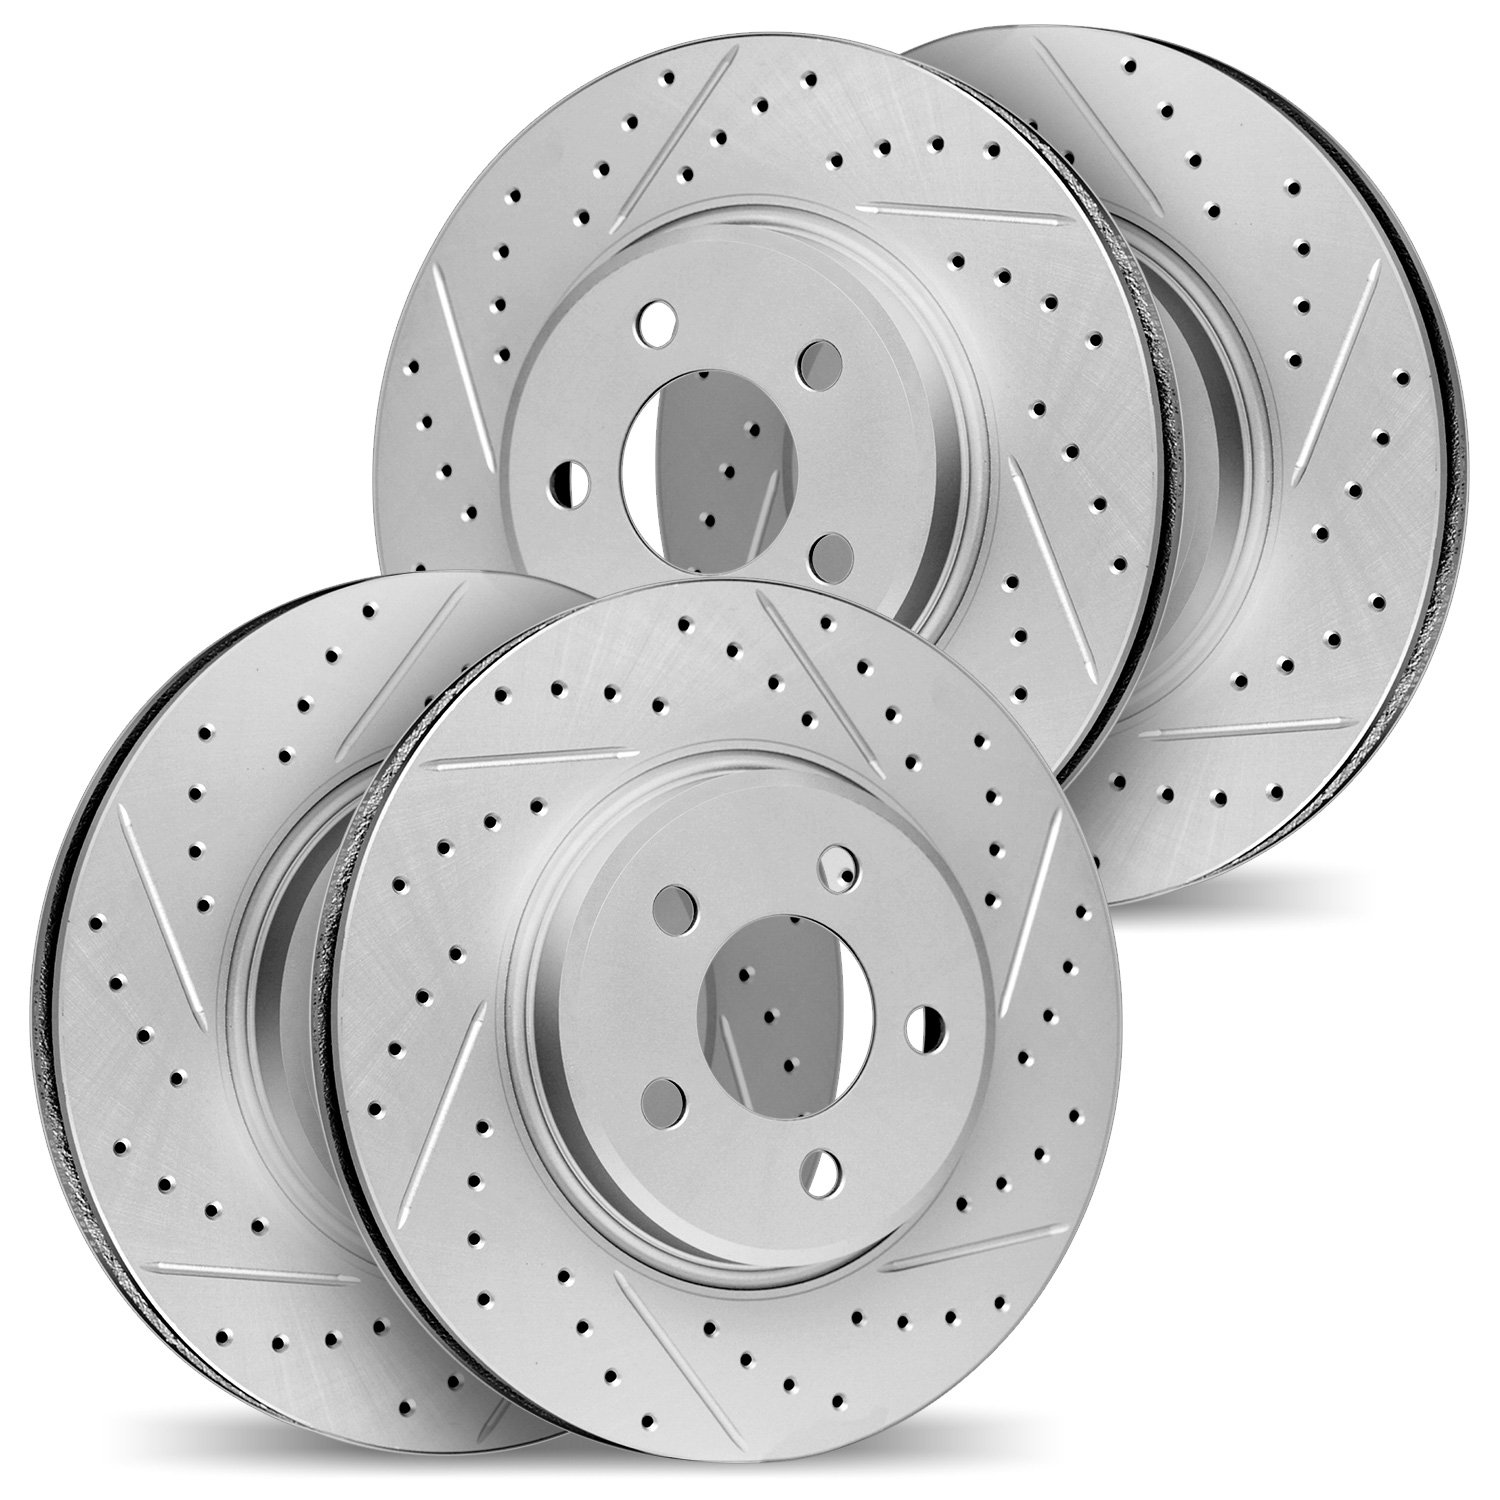 2004-31054 Geoperformance Drilled/Slotted Brake Rotors, 2001-2006 BMW, Position: Front and Rear